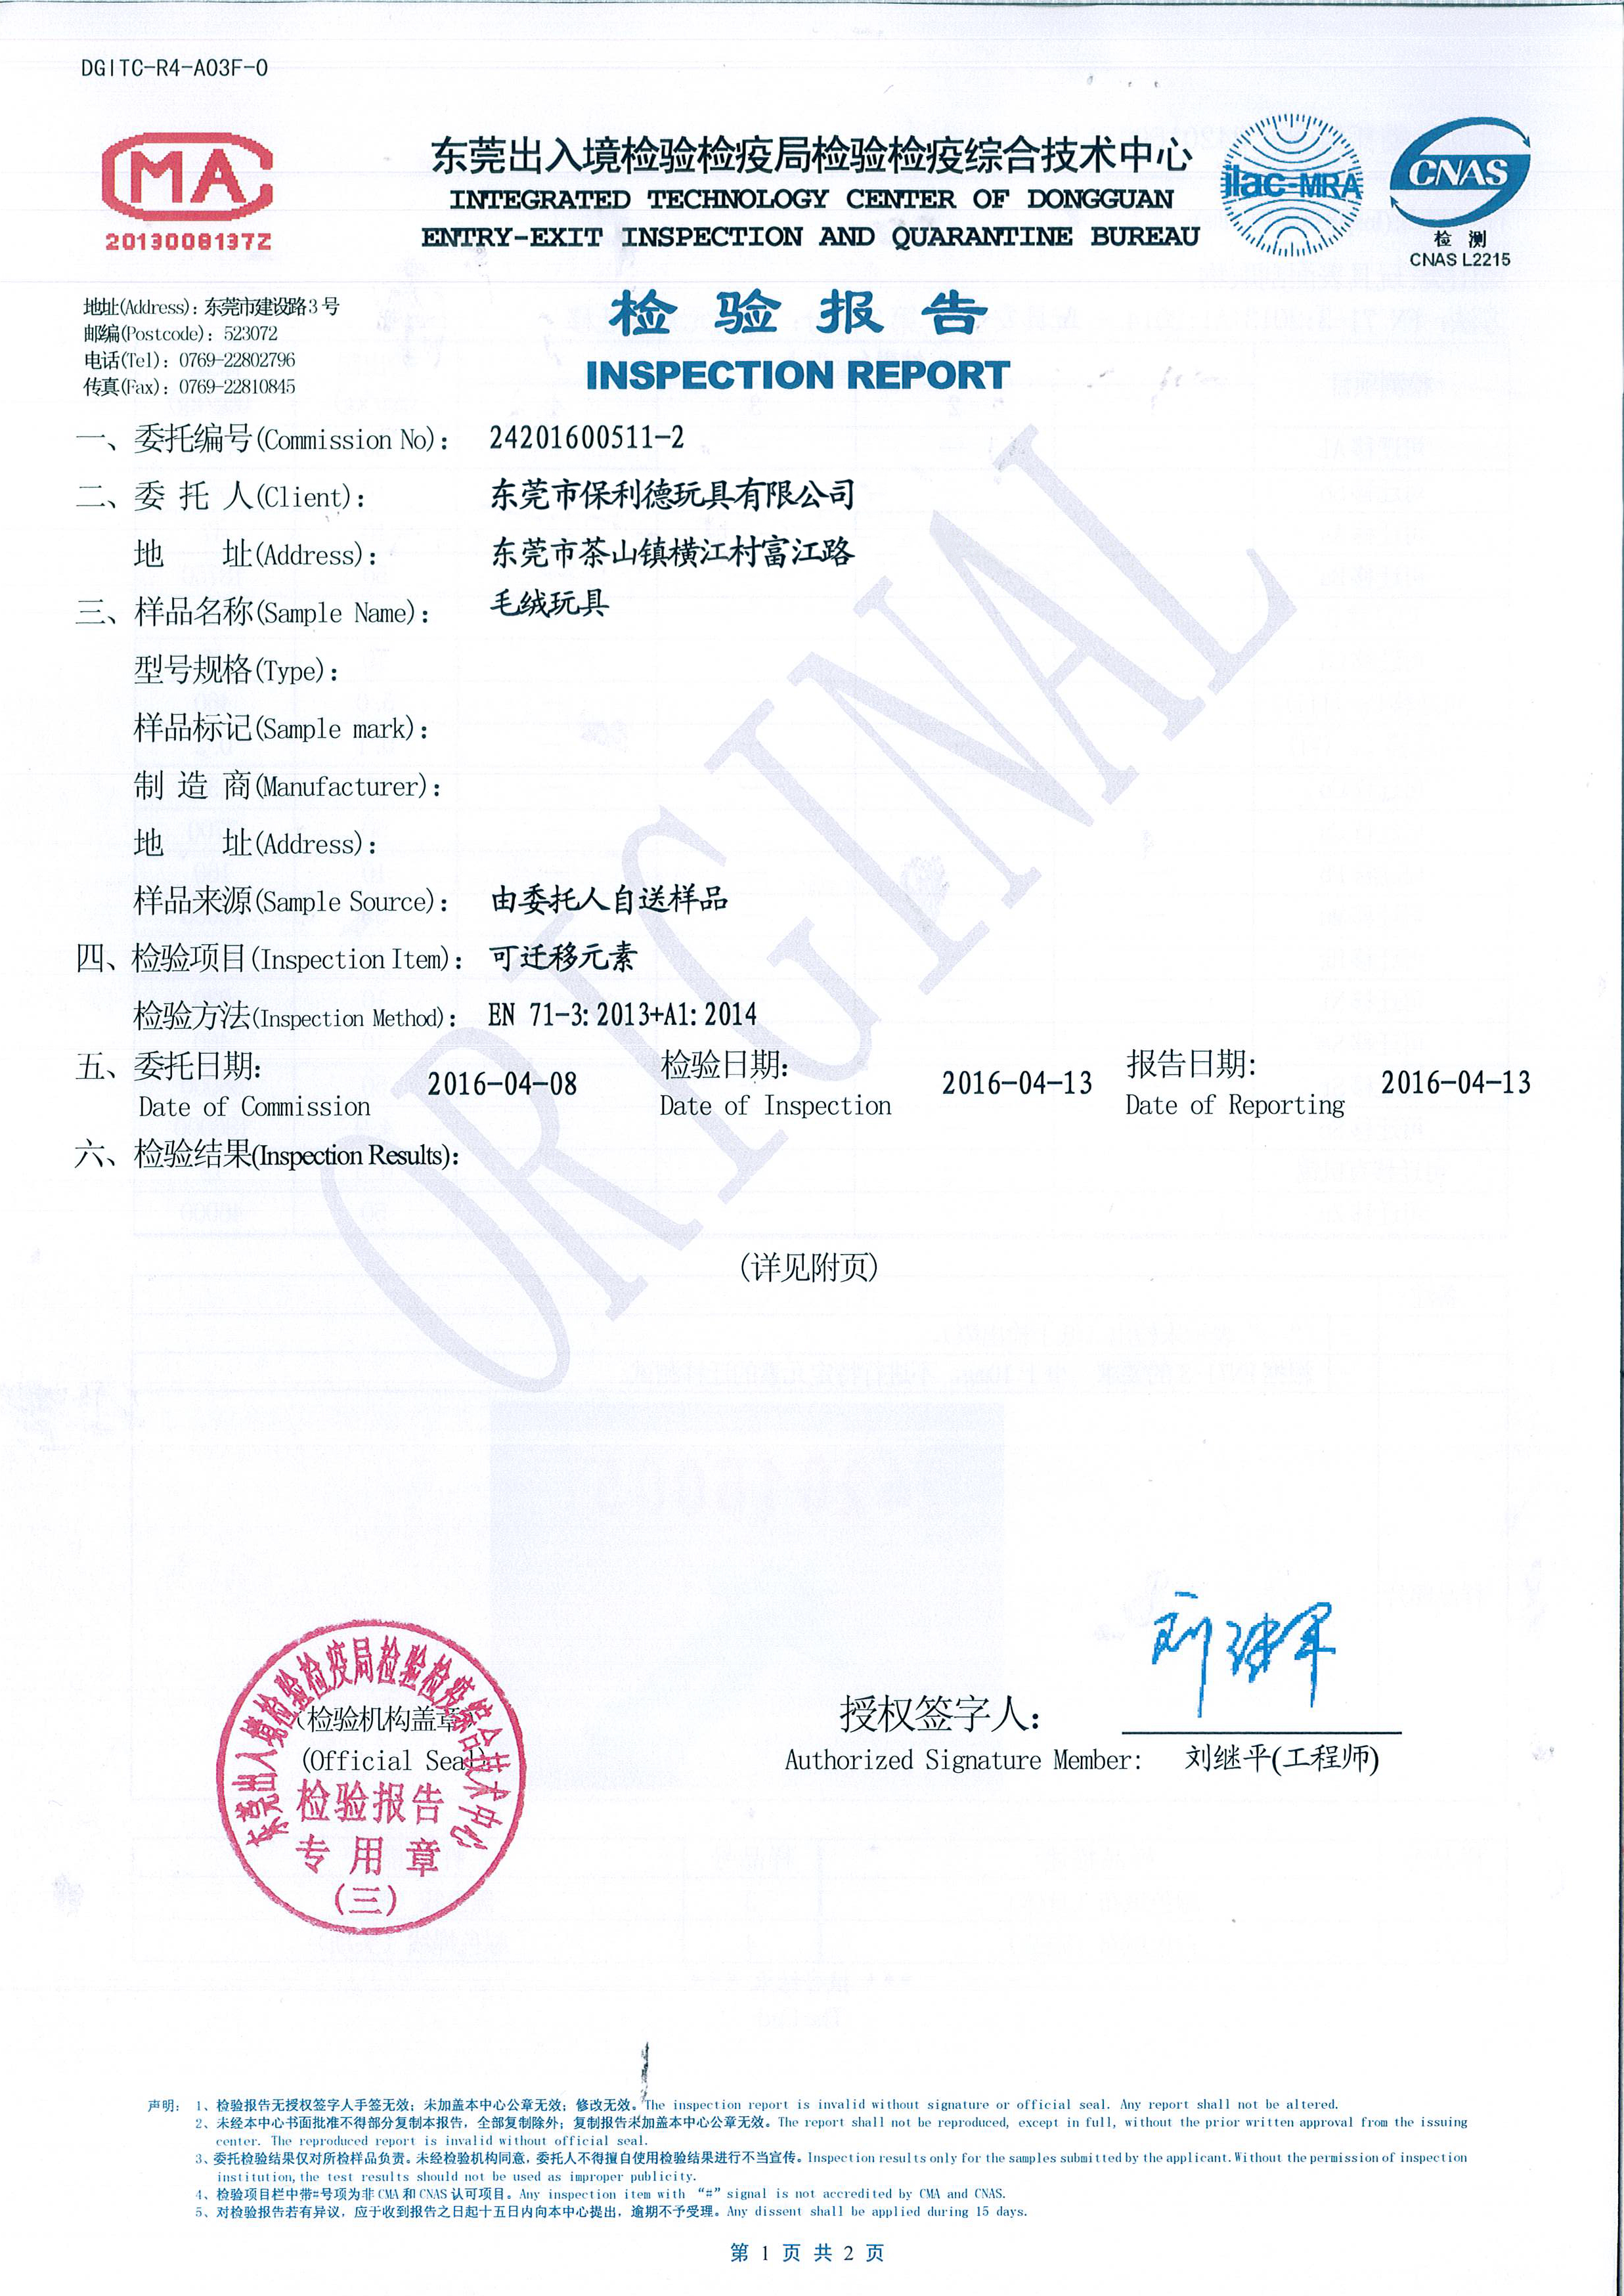 PRODUCT INSPECTION REPORT OF PAOLIDE TOY  EN71